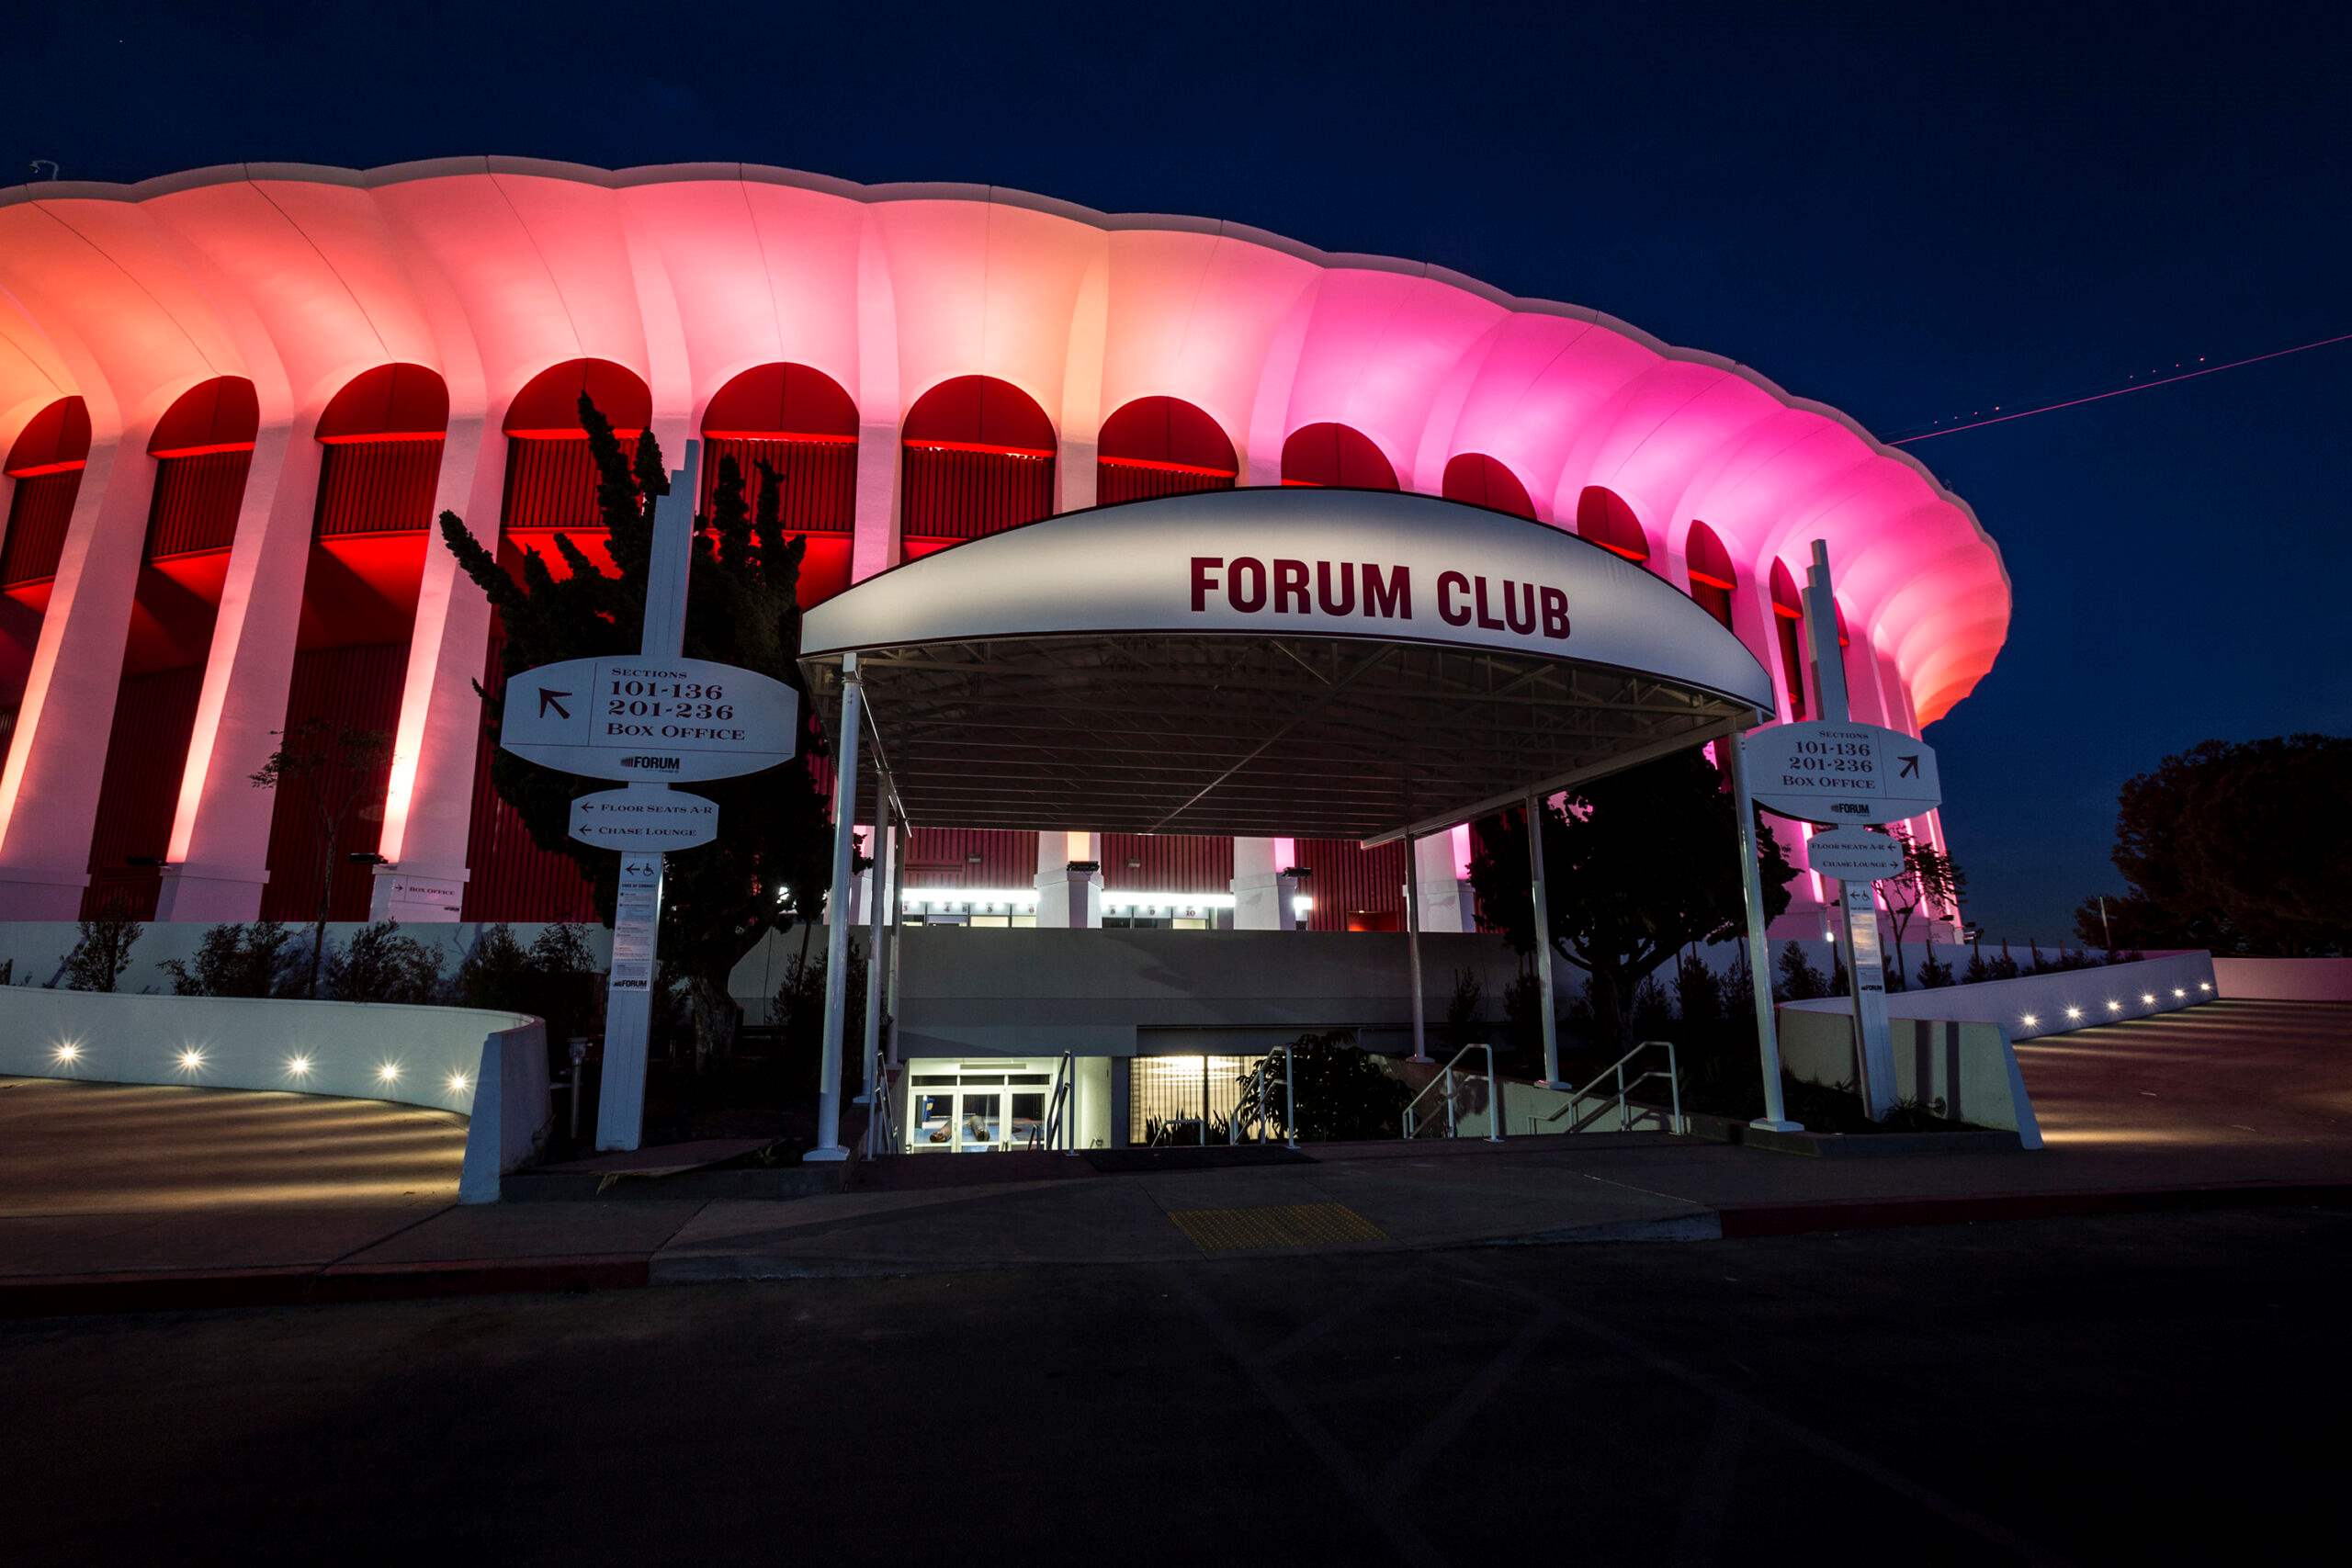 14-astounding-facts-about-the-forum-inglewood